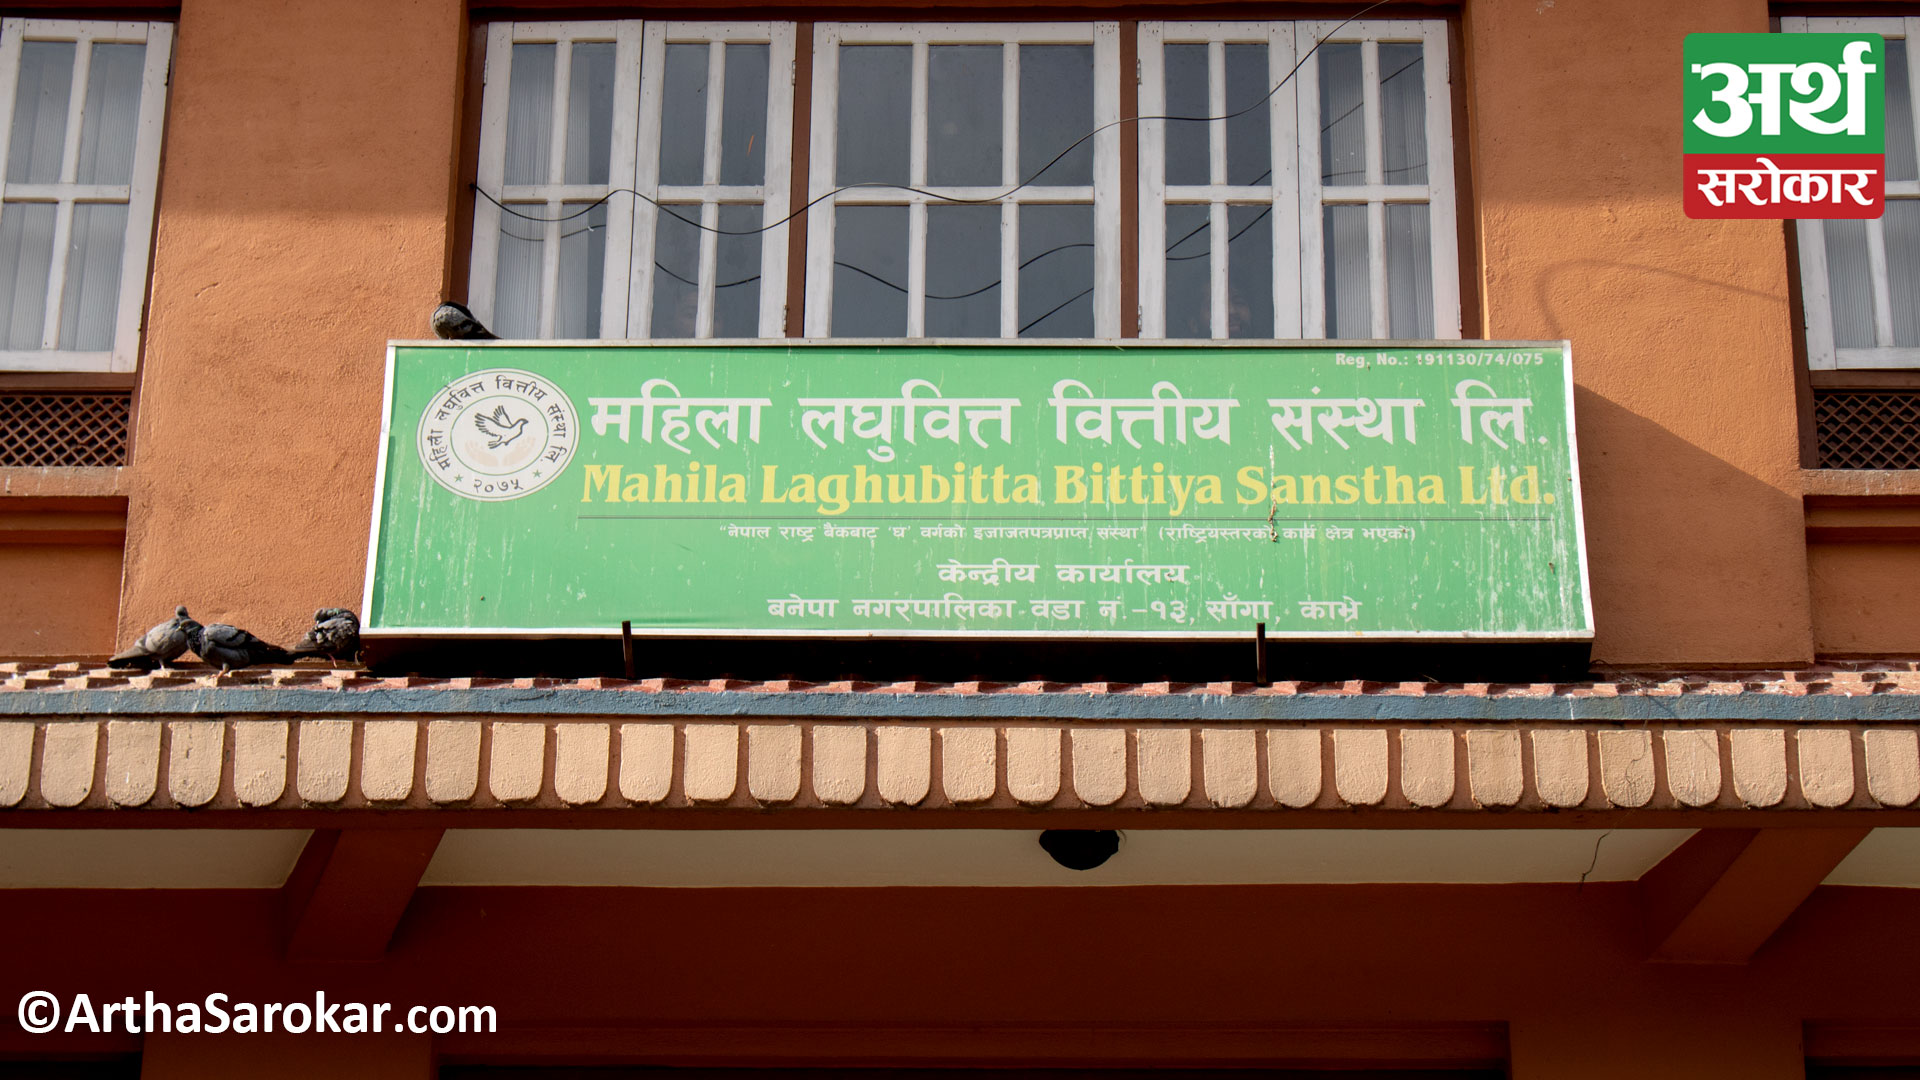 Mahila Laghubitta earned a profit of 1 crore 8 lakh rupees in the first quarter